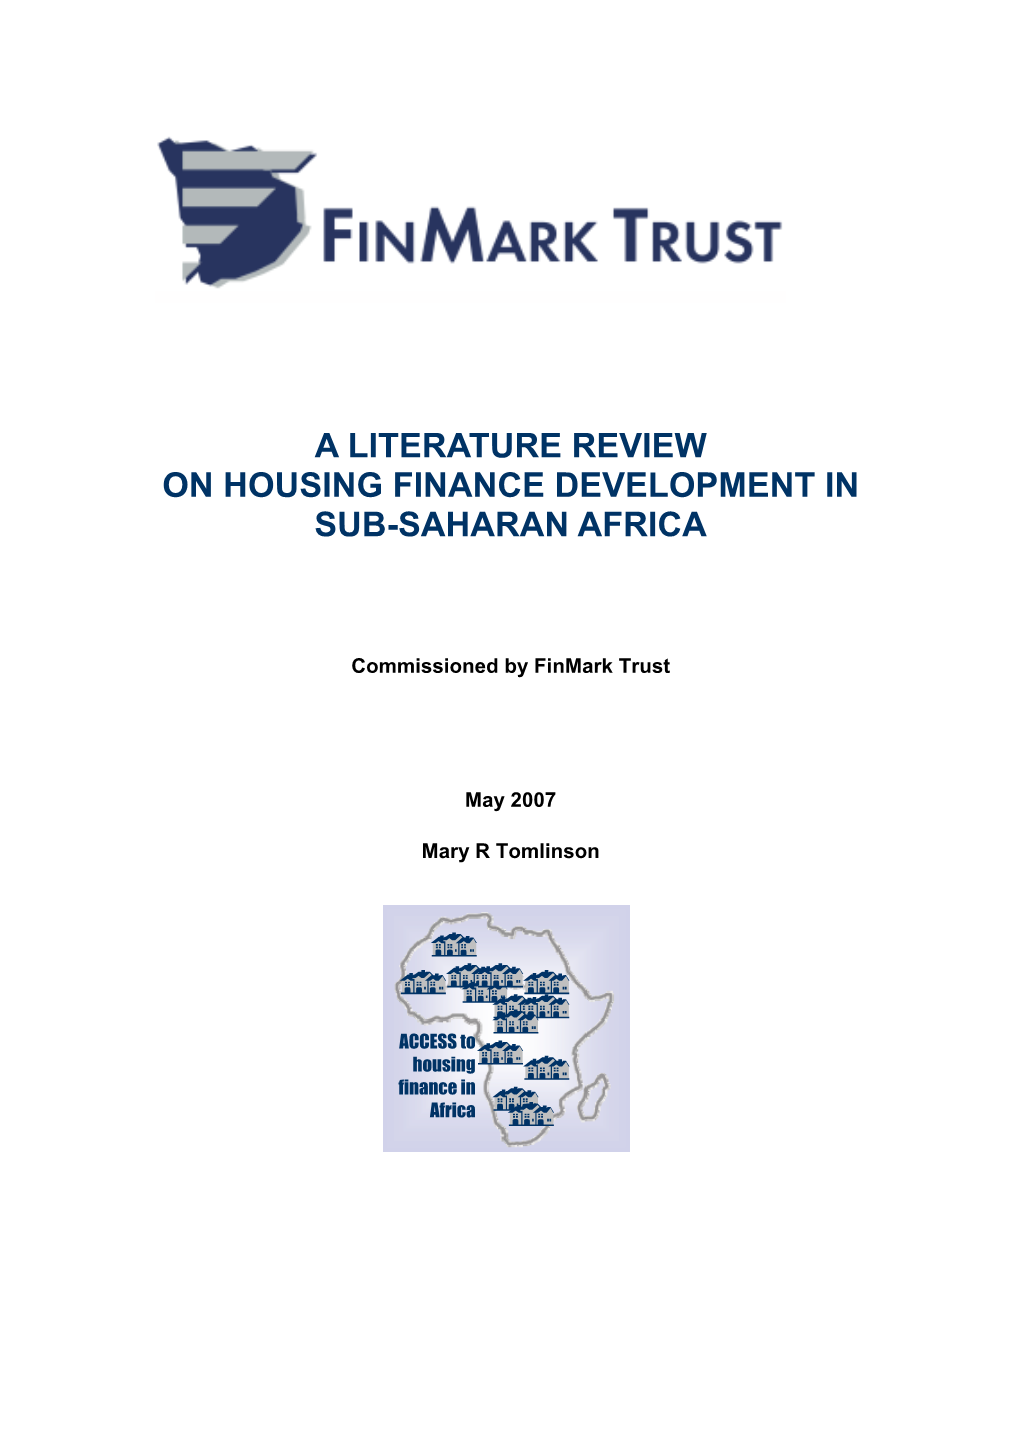 A Literature Review on Housing Finance Development in Sub-Saharan Africa